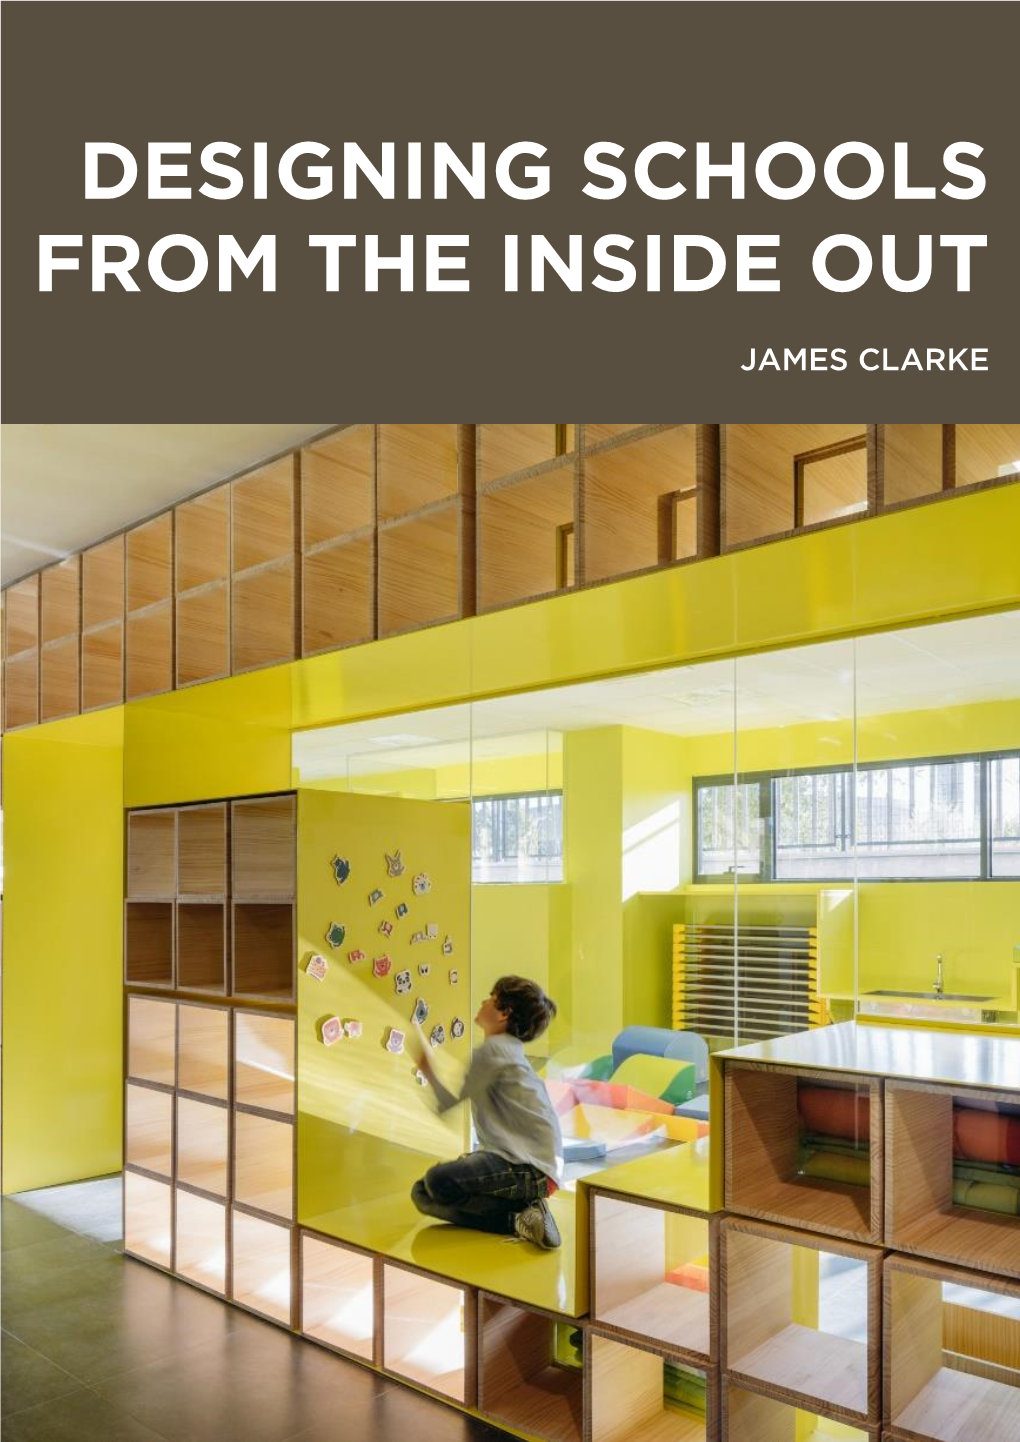 Designing Schools from the Inside Out